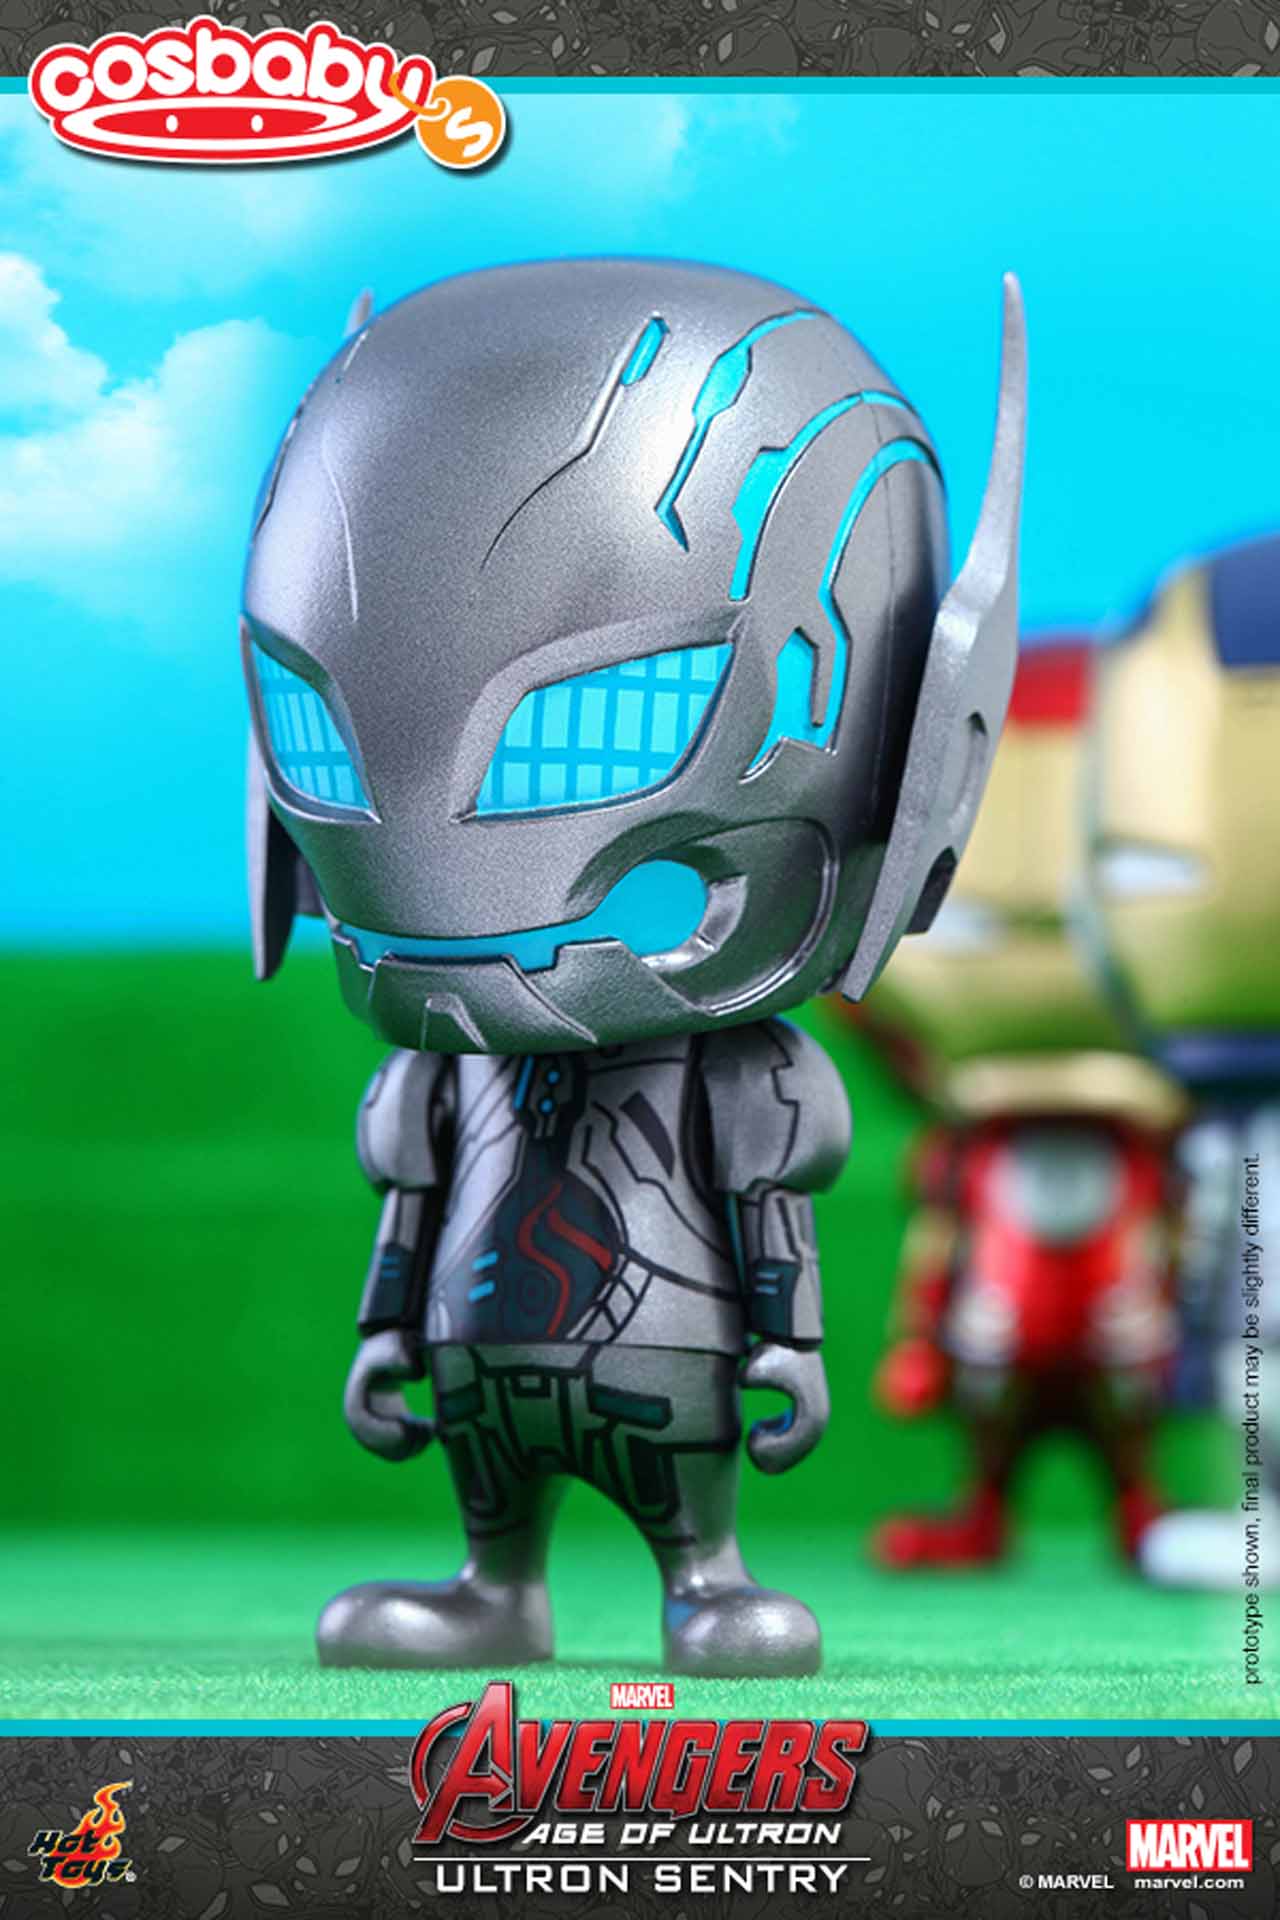 Avengers: Age of Ultron Cosbaby (S) Series 1